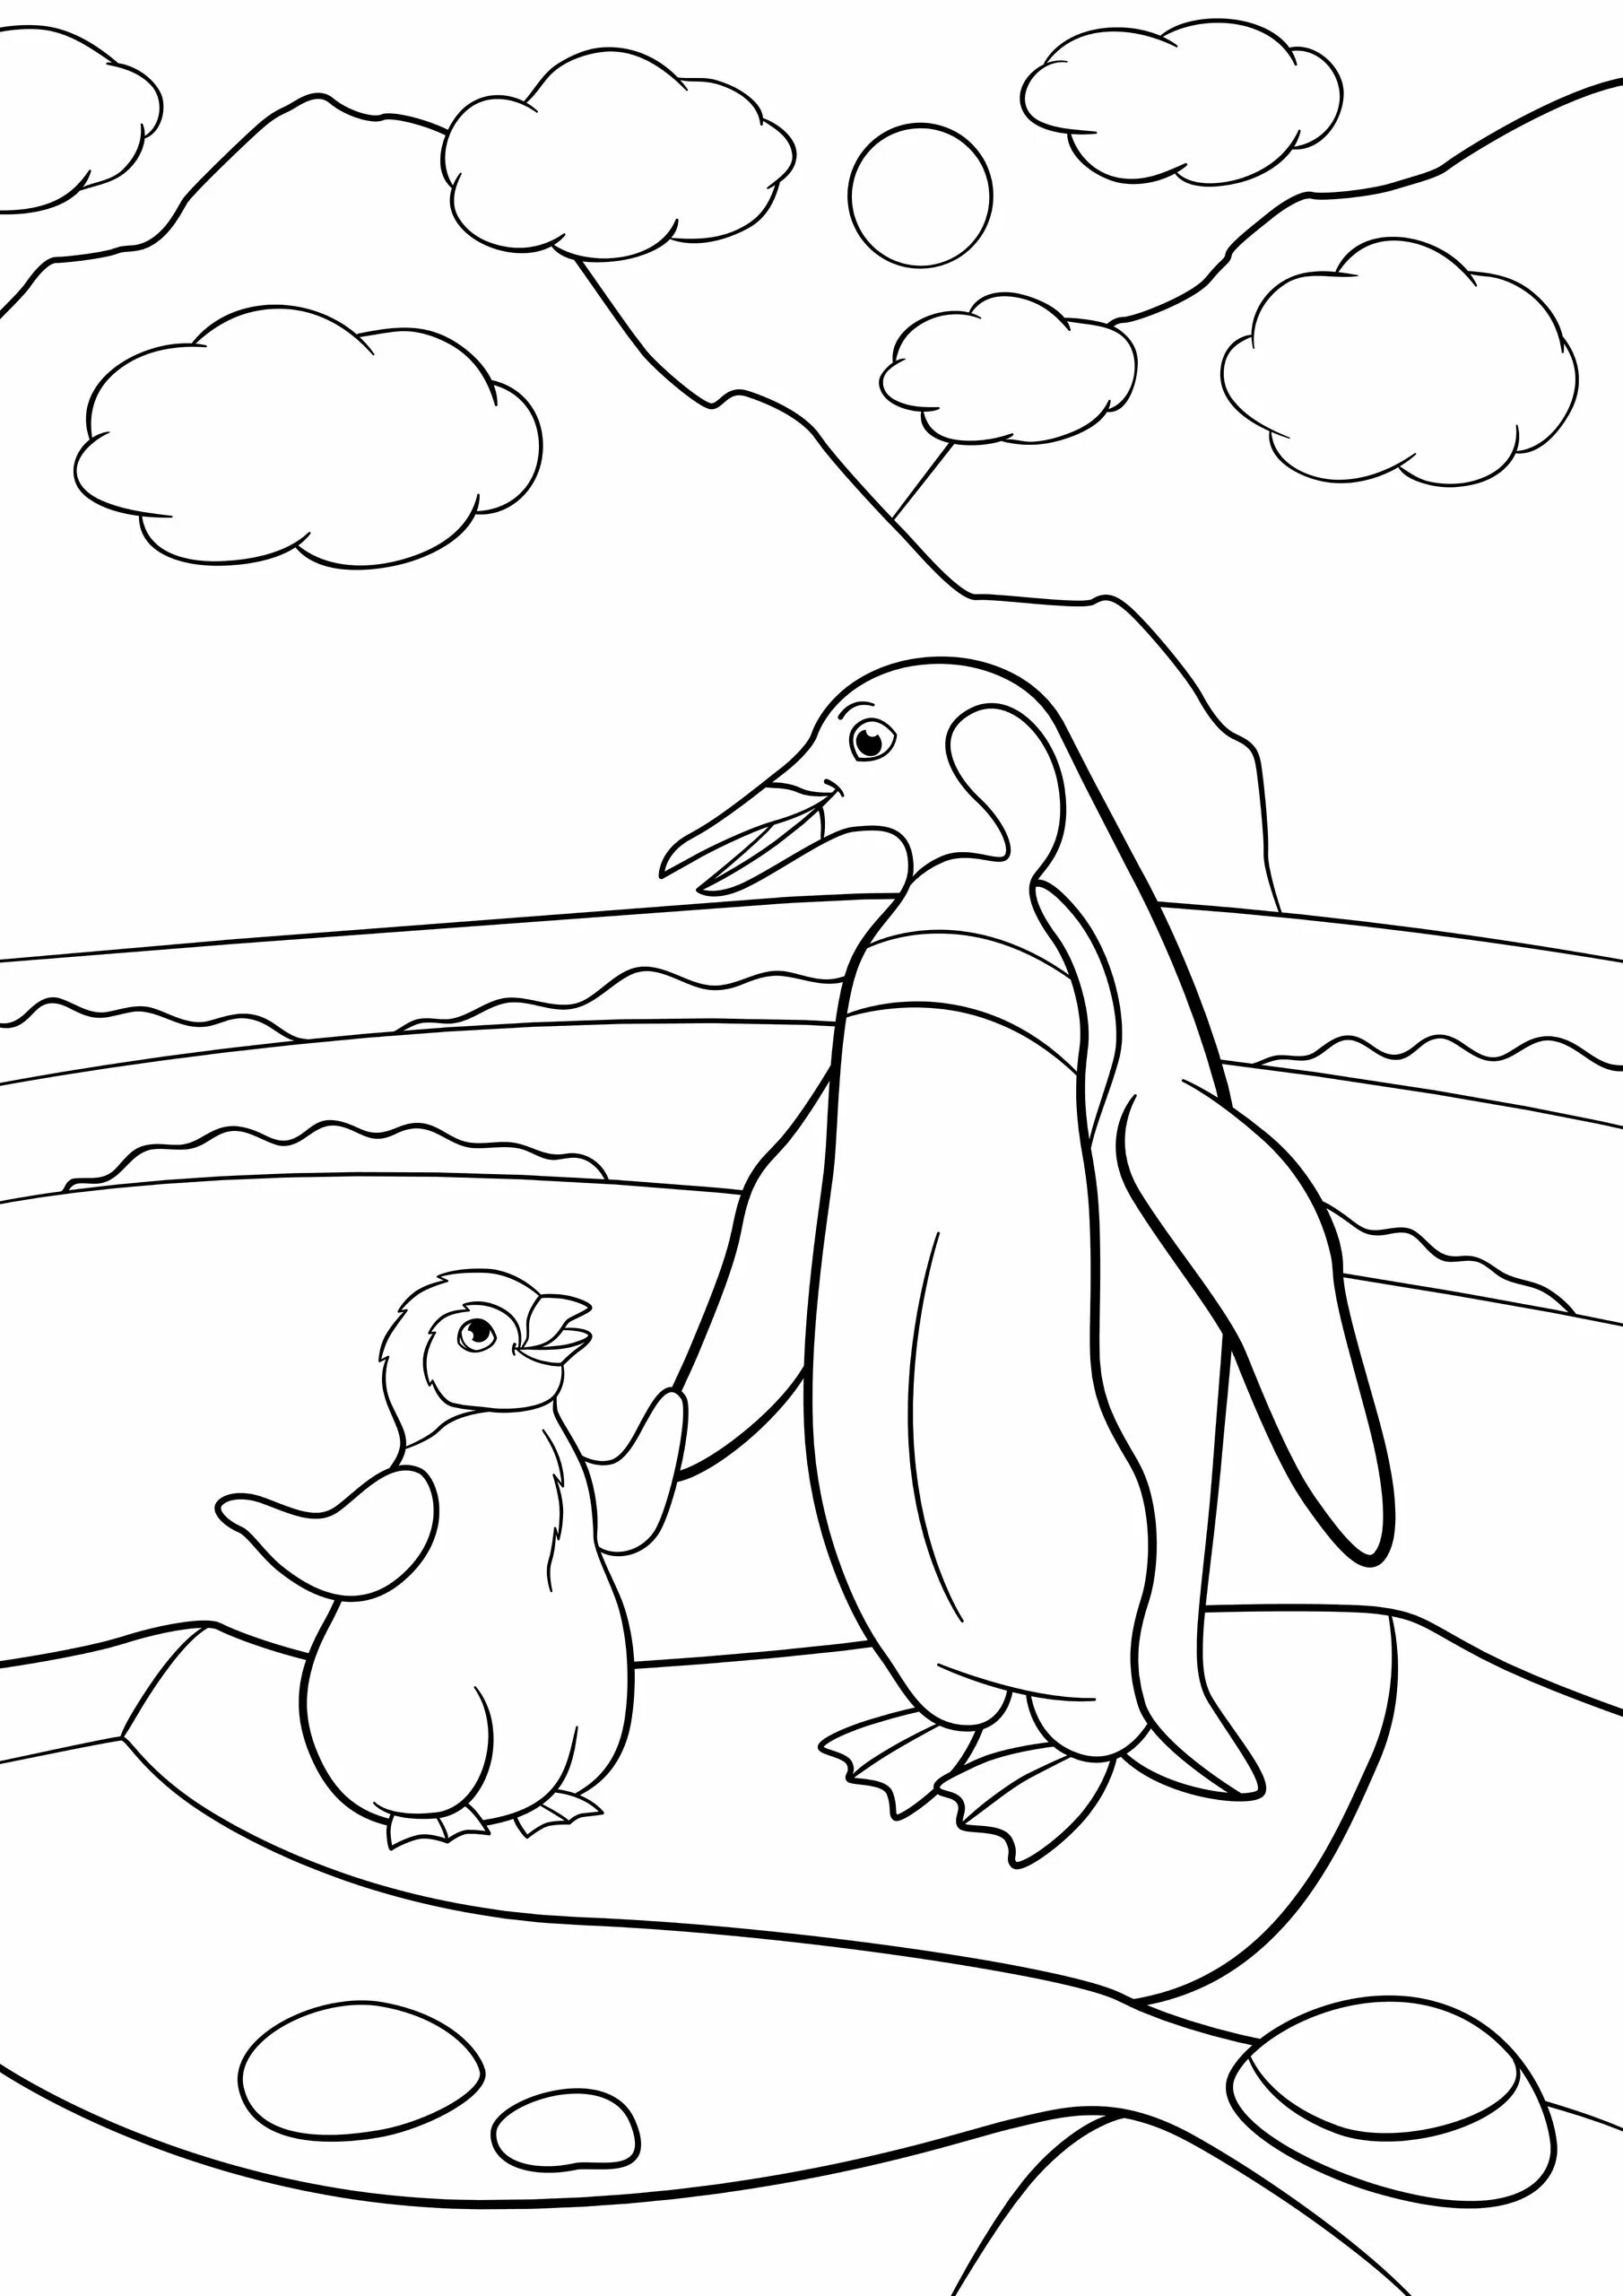 Coloring page hypnotic penguin on an ice floe for children